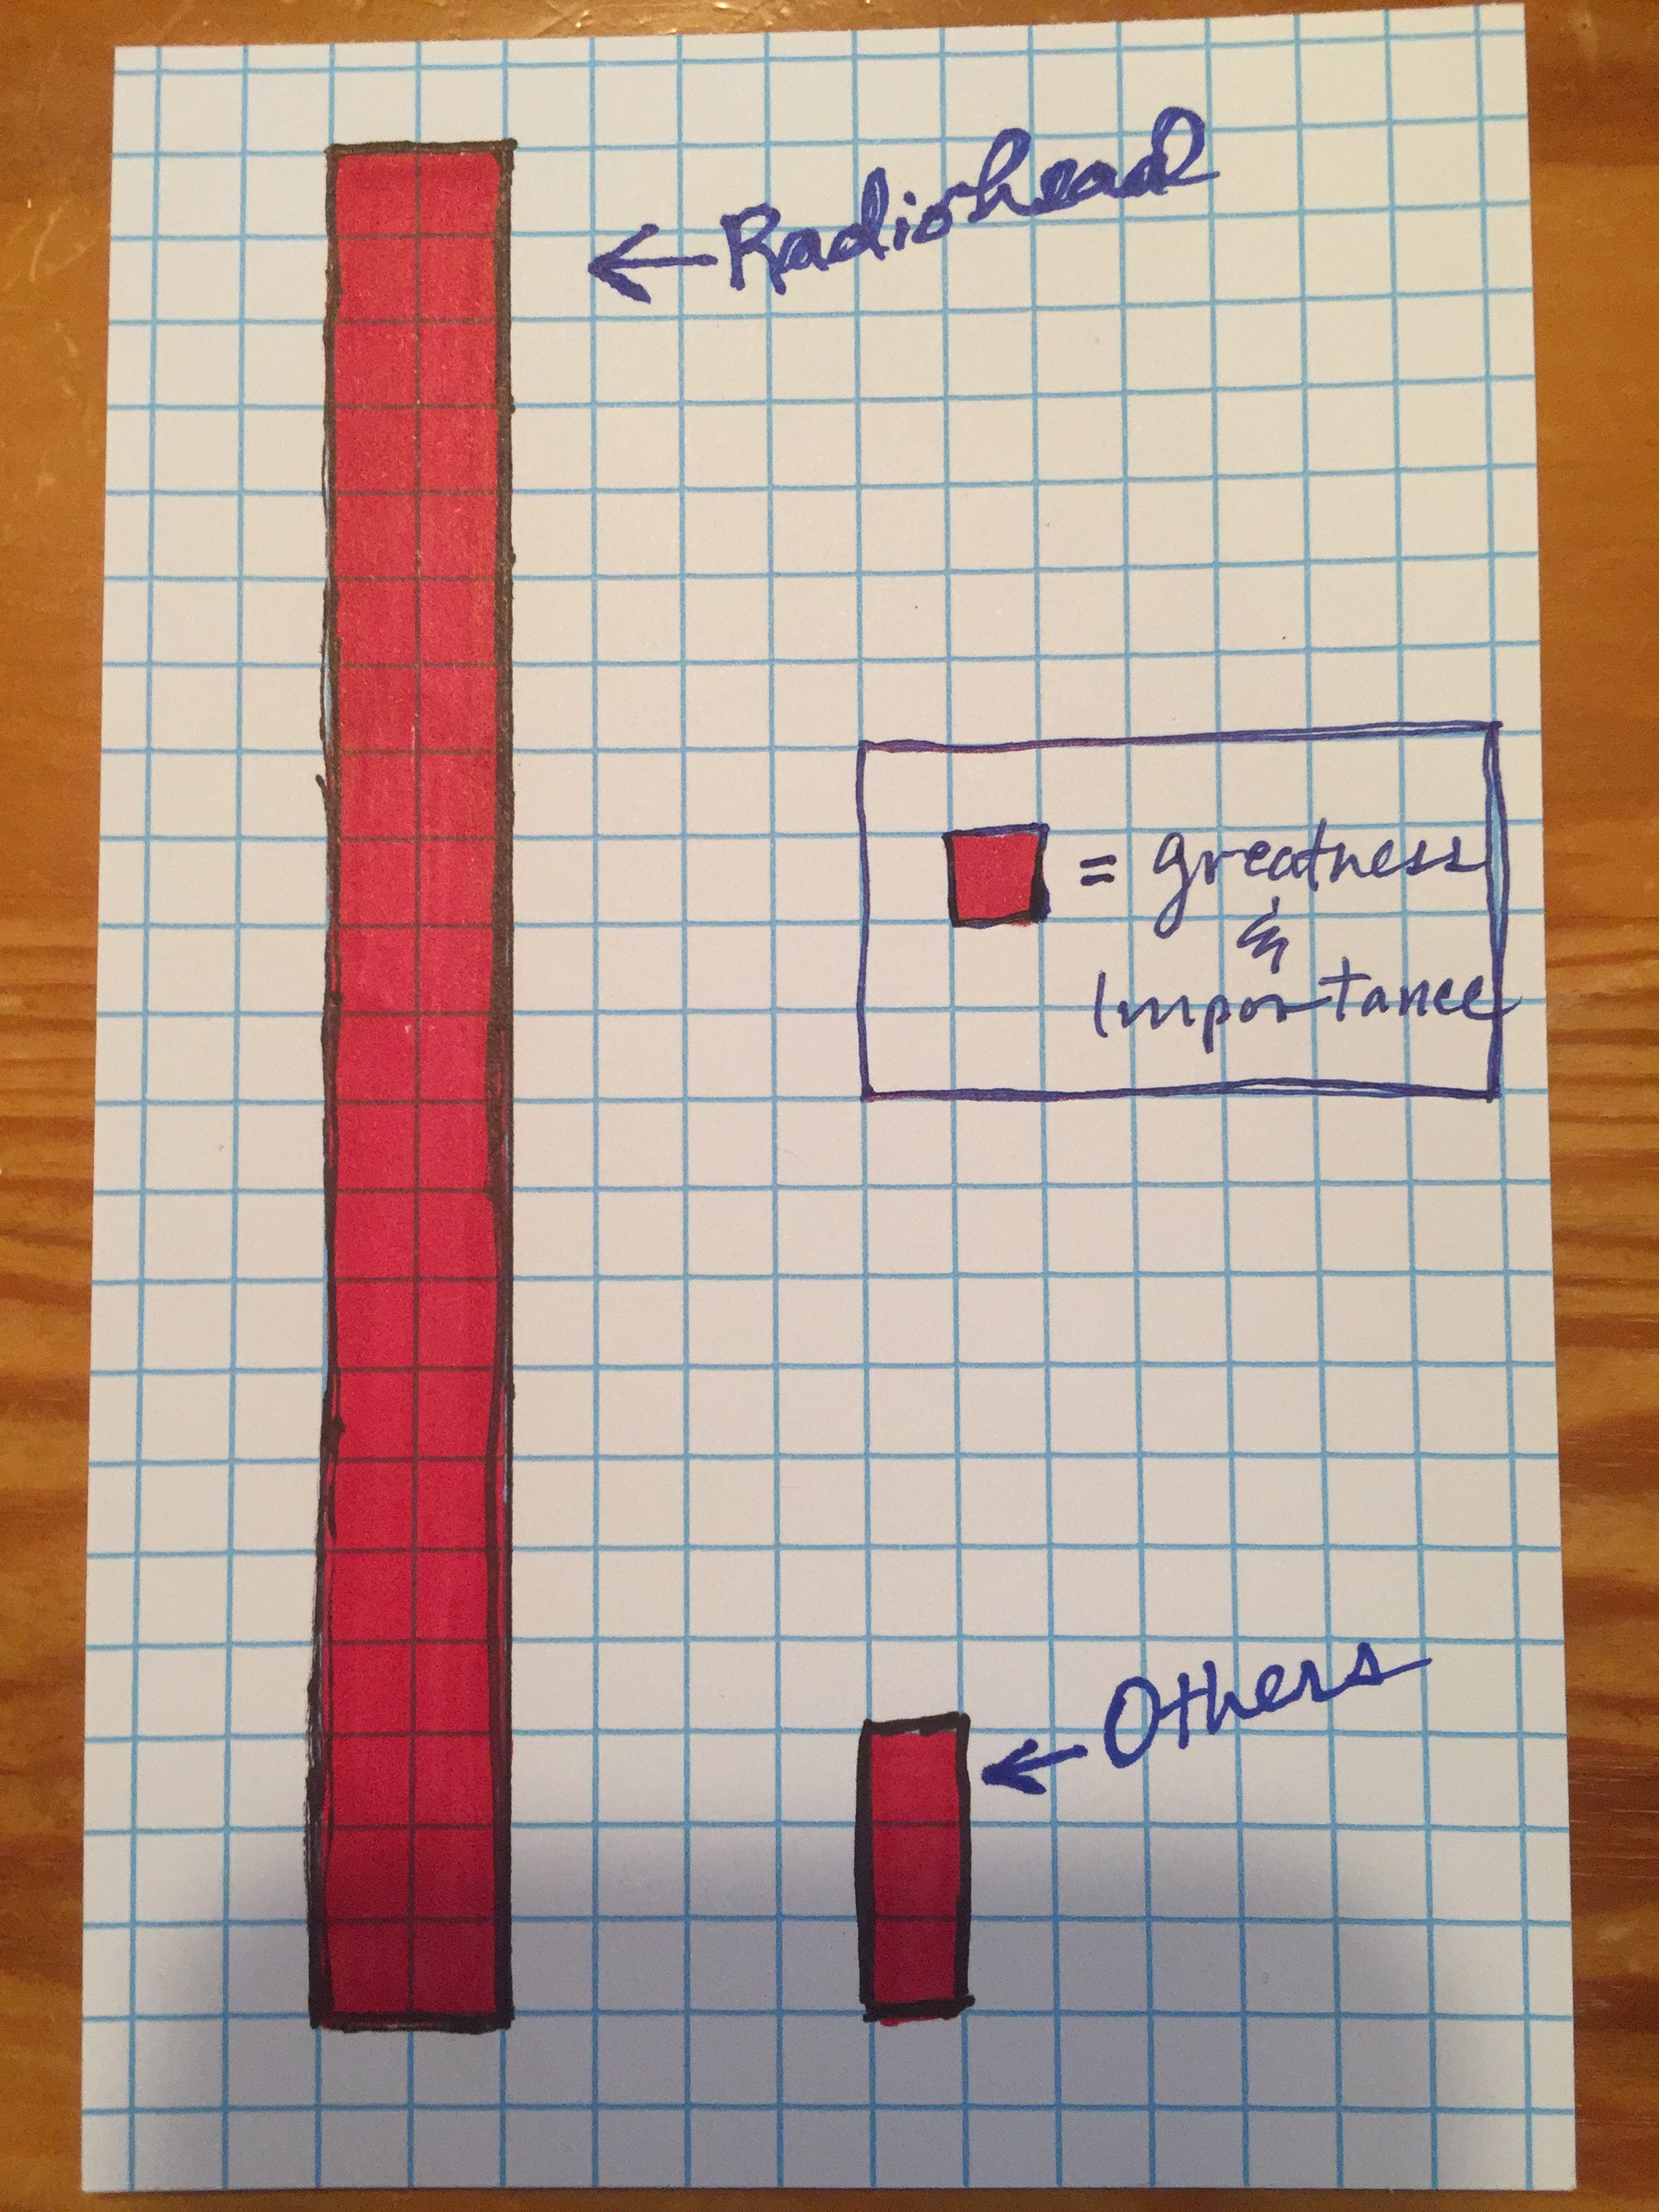 Graph measuring greatness and importance.